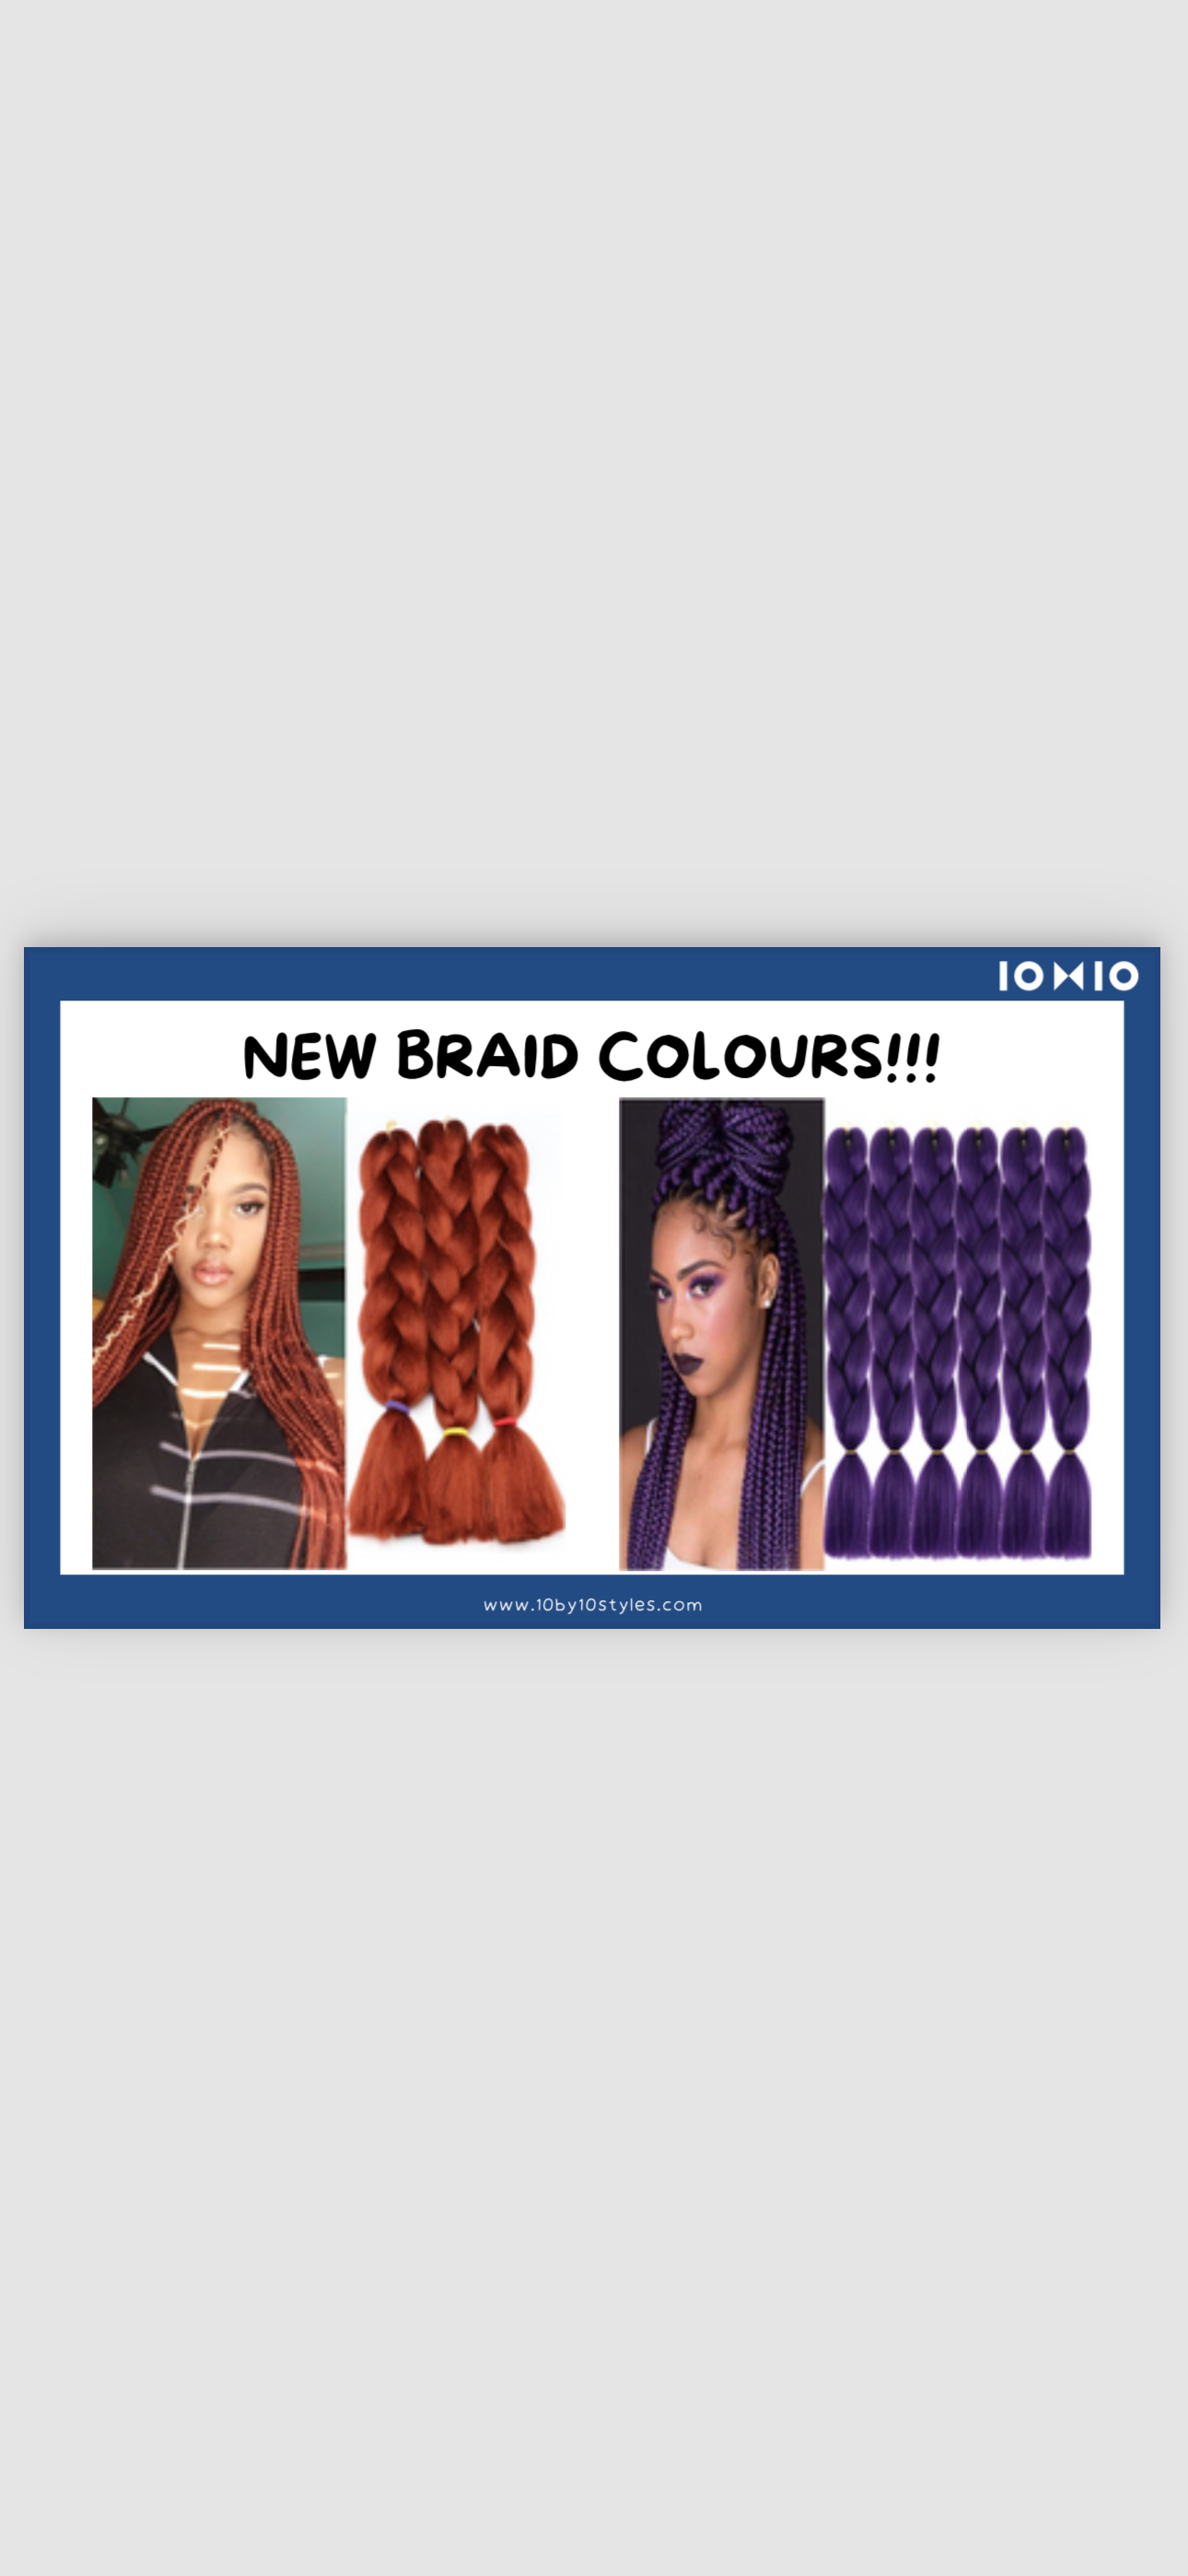 Pre-Order New Colours of 10x10 Braids NOW!!!